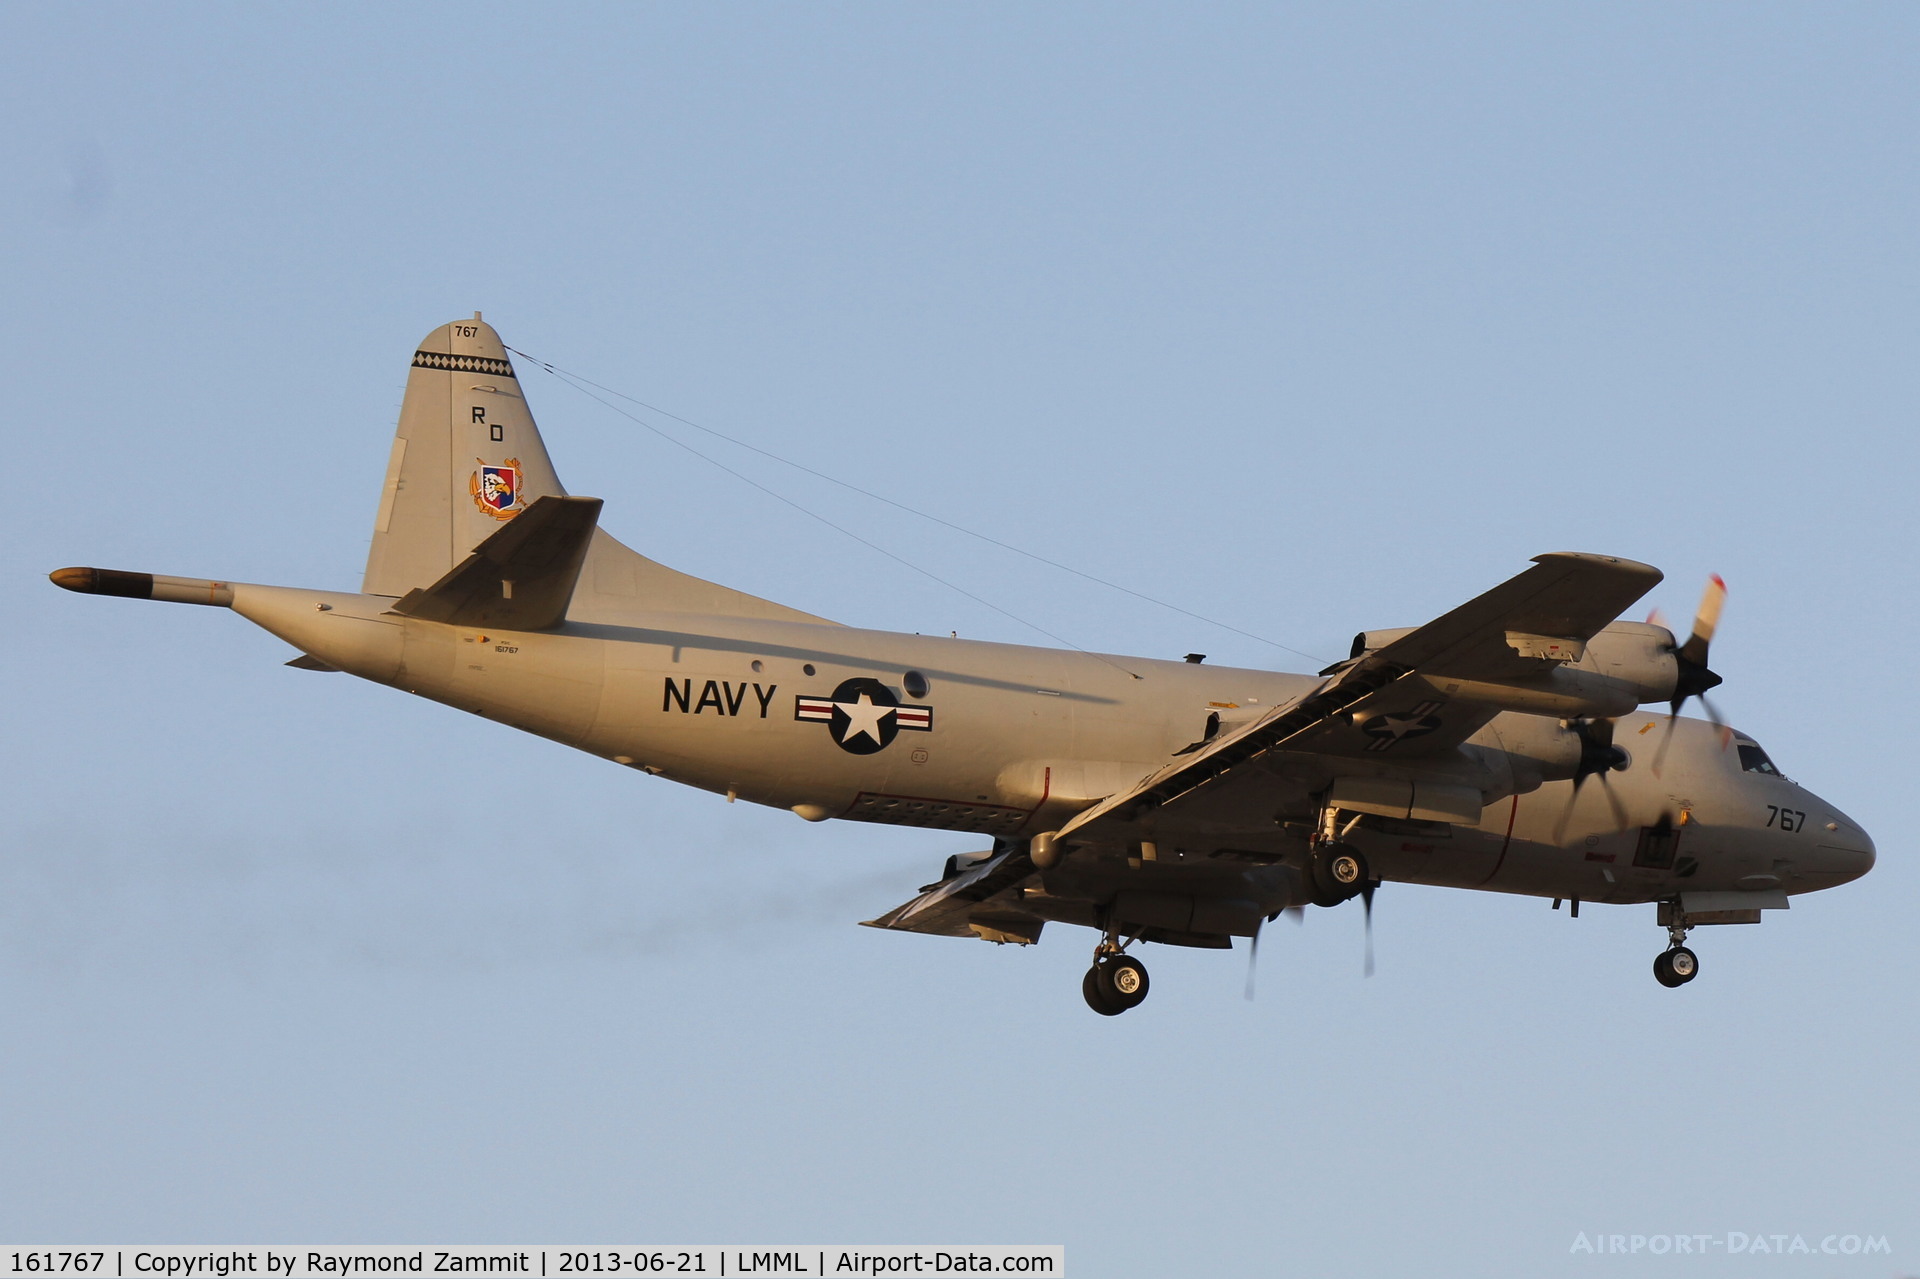 161767, 1985 Lockheed P-3C Orion C/N 285G-5783, P3 Orion 161767/767 PD of US Navy performing touch and go.